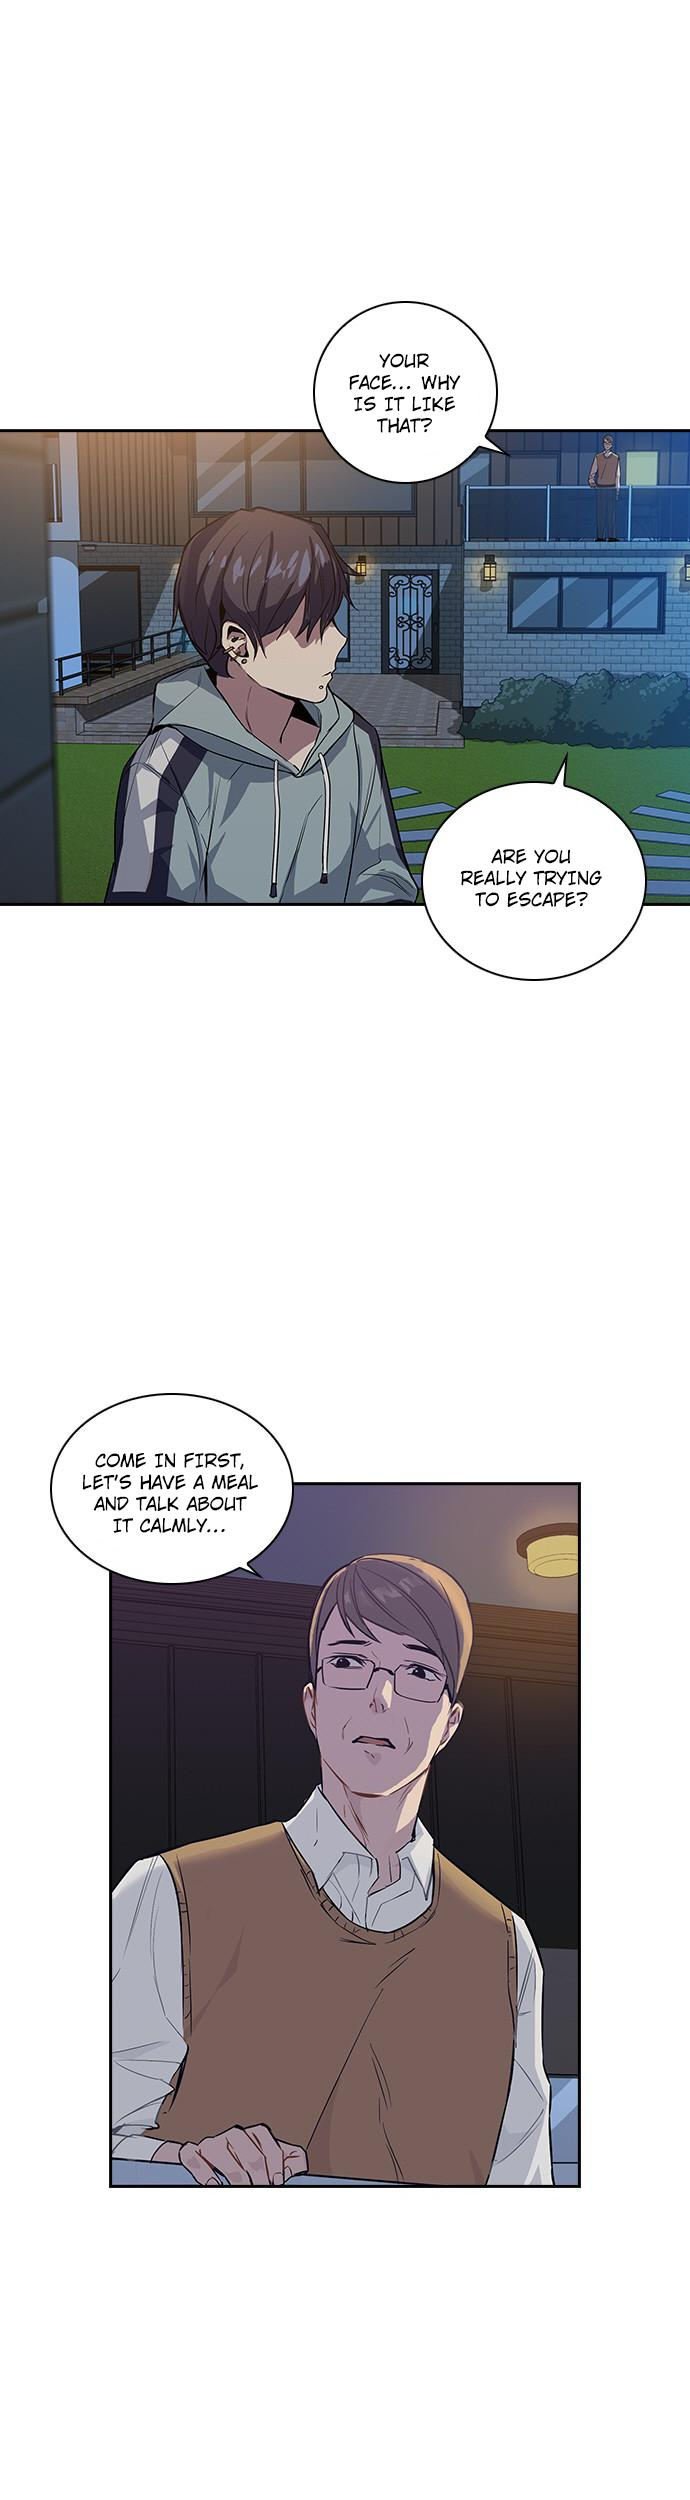 the-world-is-money-and-power-chap-8-2